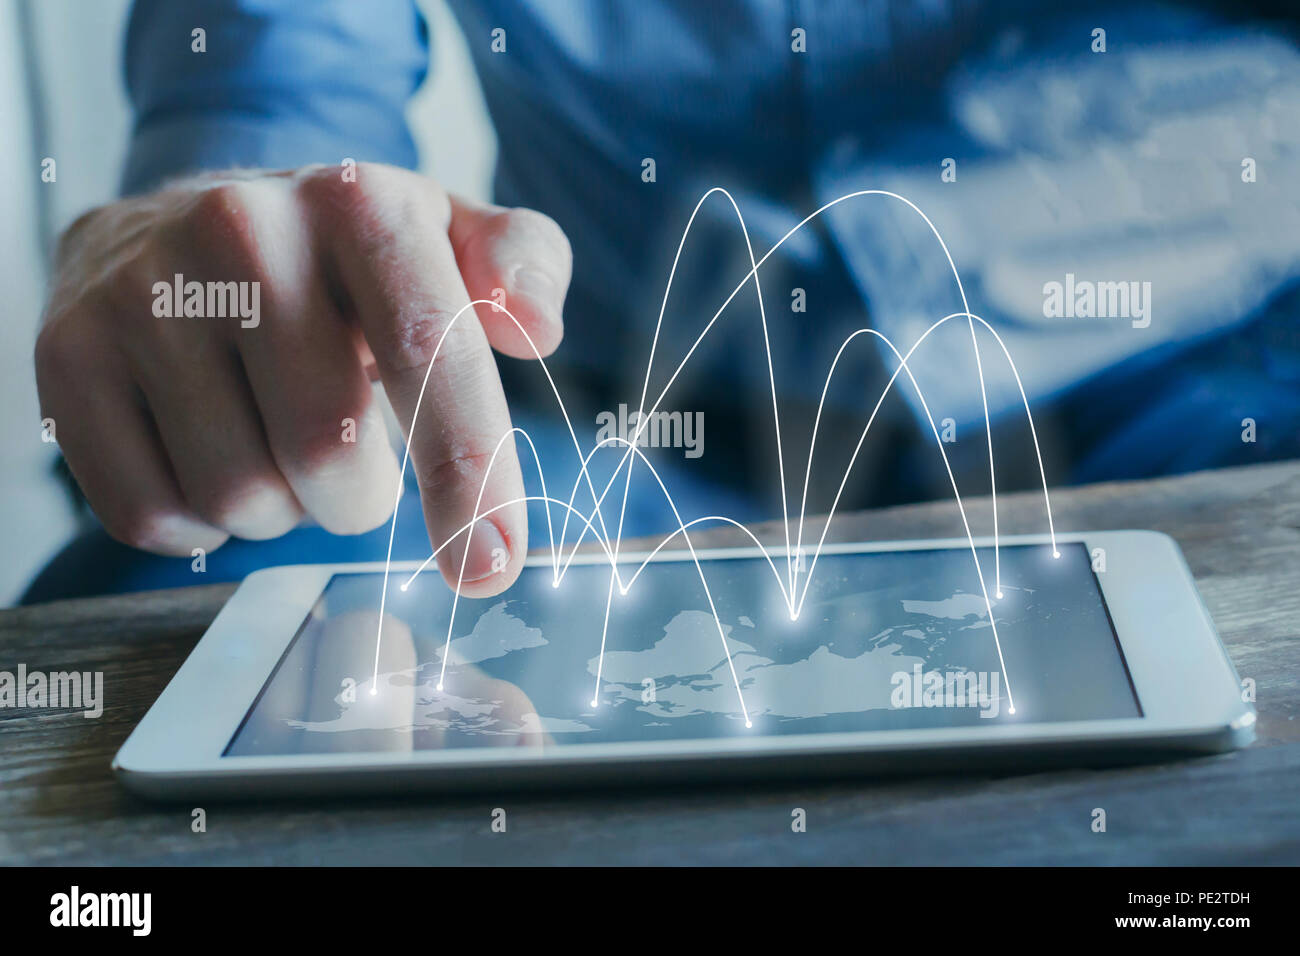 global business network and communication concept with businessman working on tablet screen with world map and international connections Stock Photo